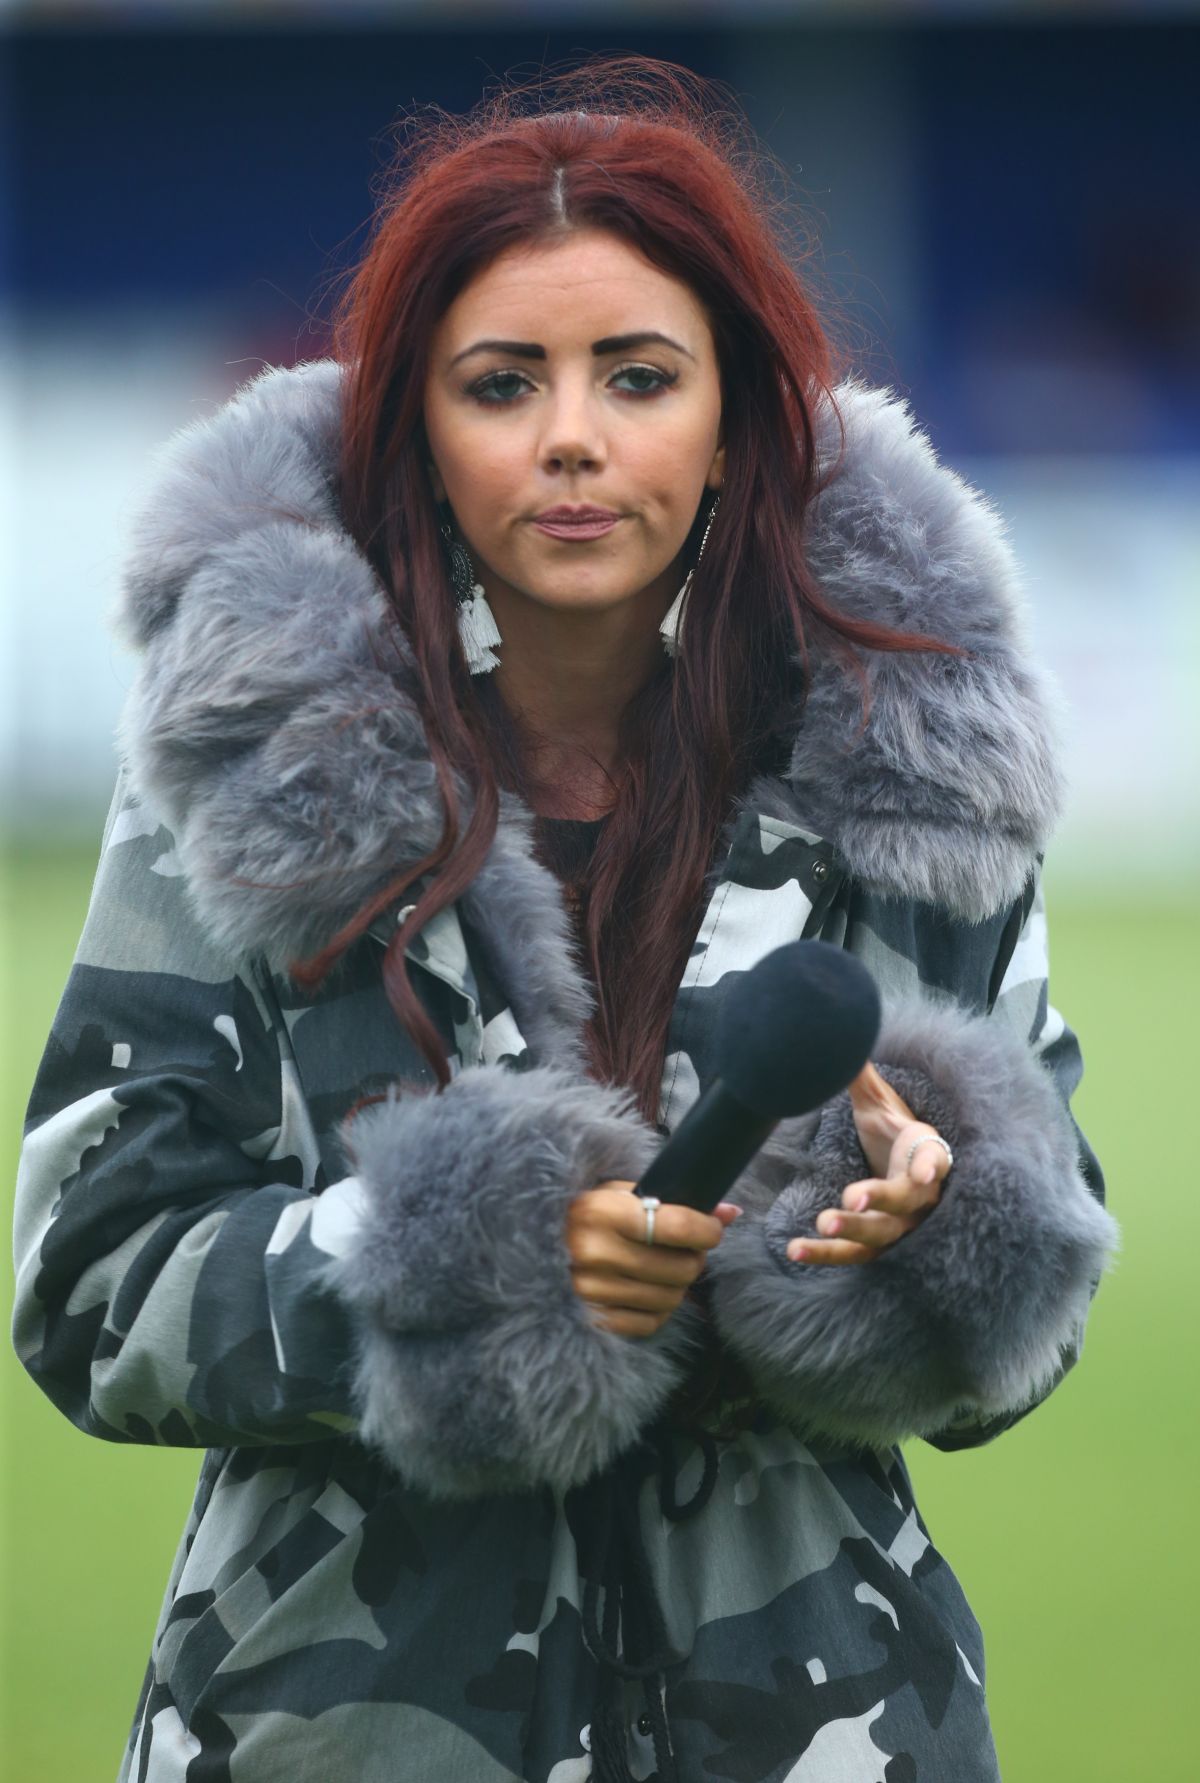 LYDIA LUCY Performs at Friendly Match Between Billericay Town and West Ham United 08/08/2017